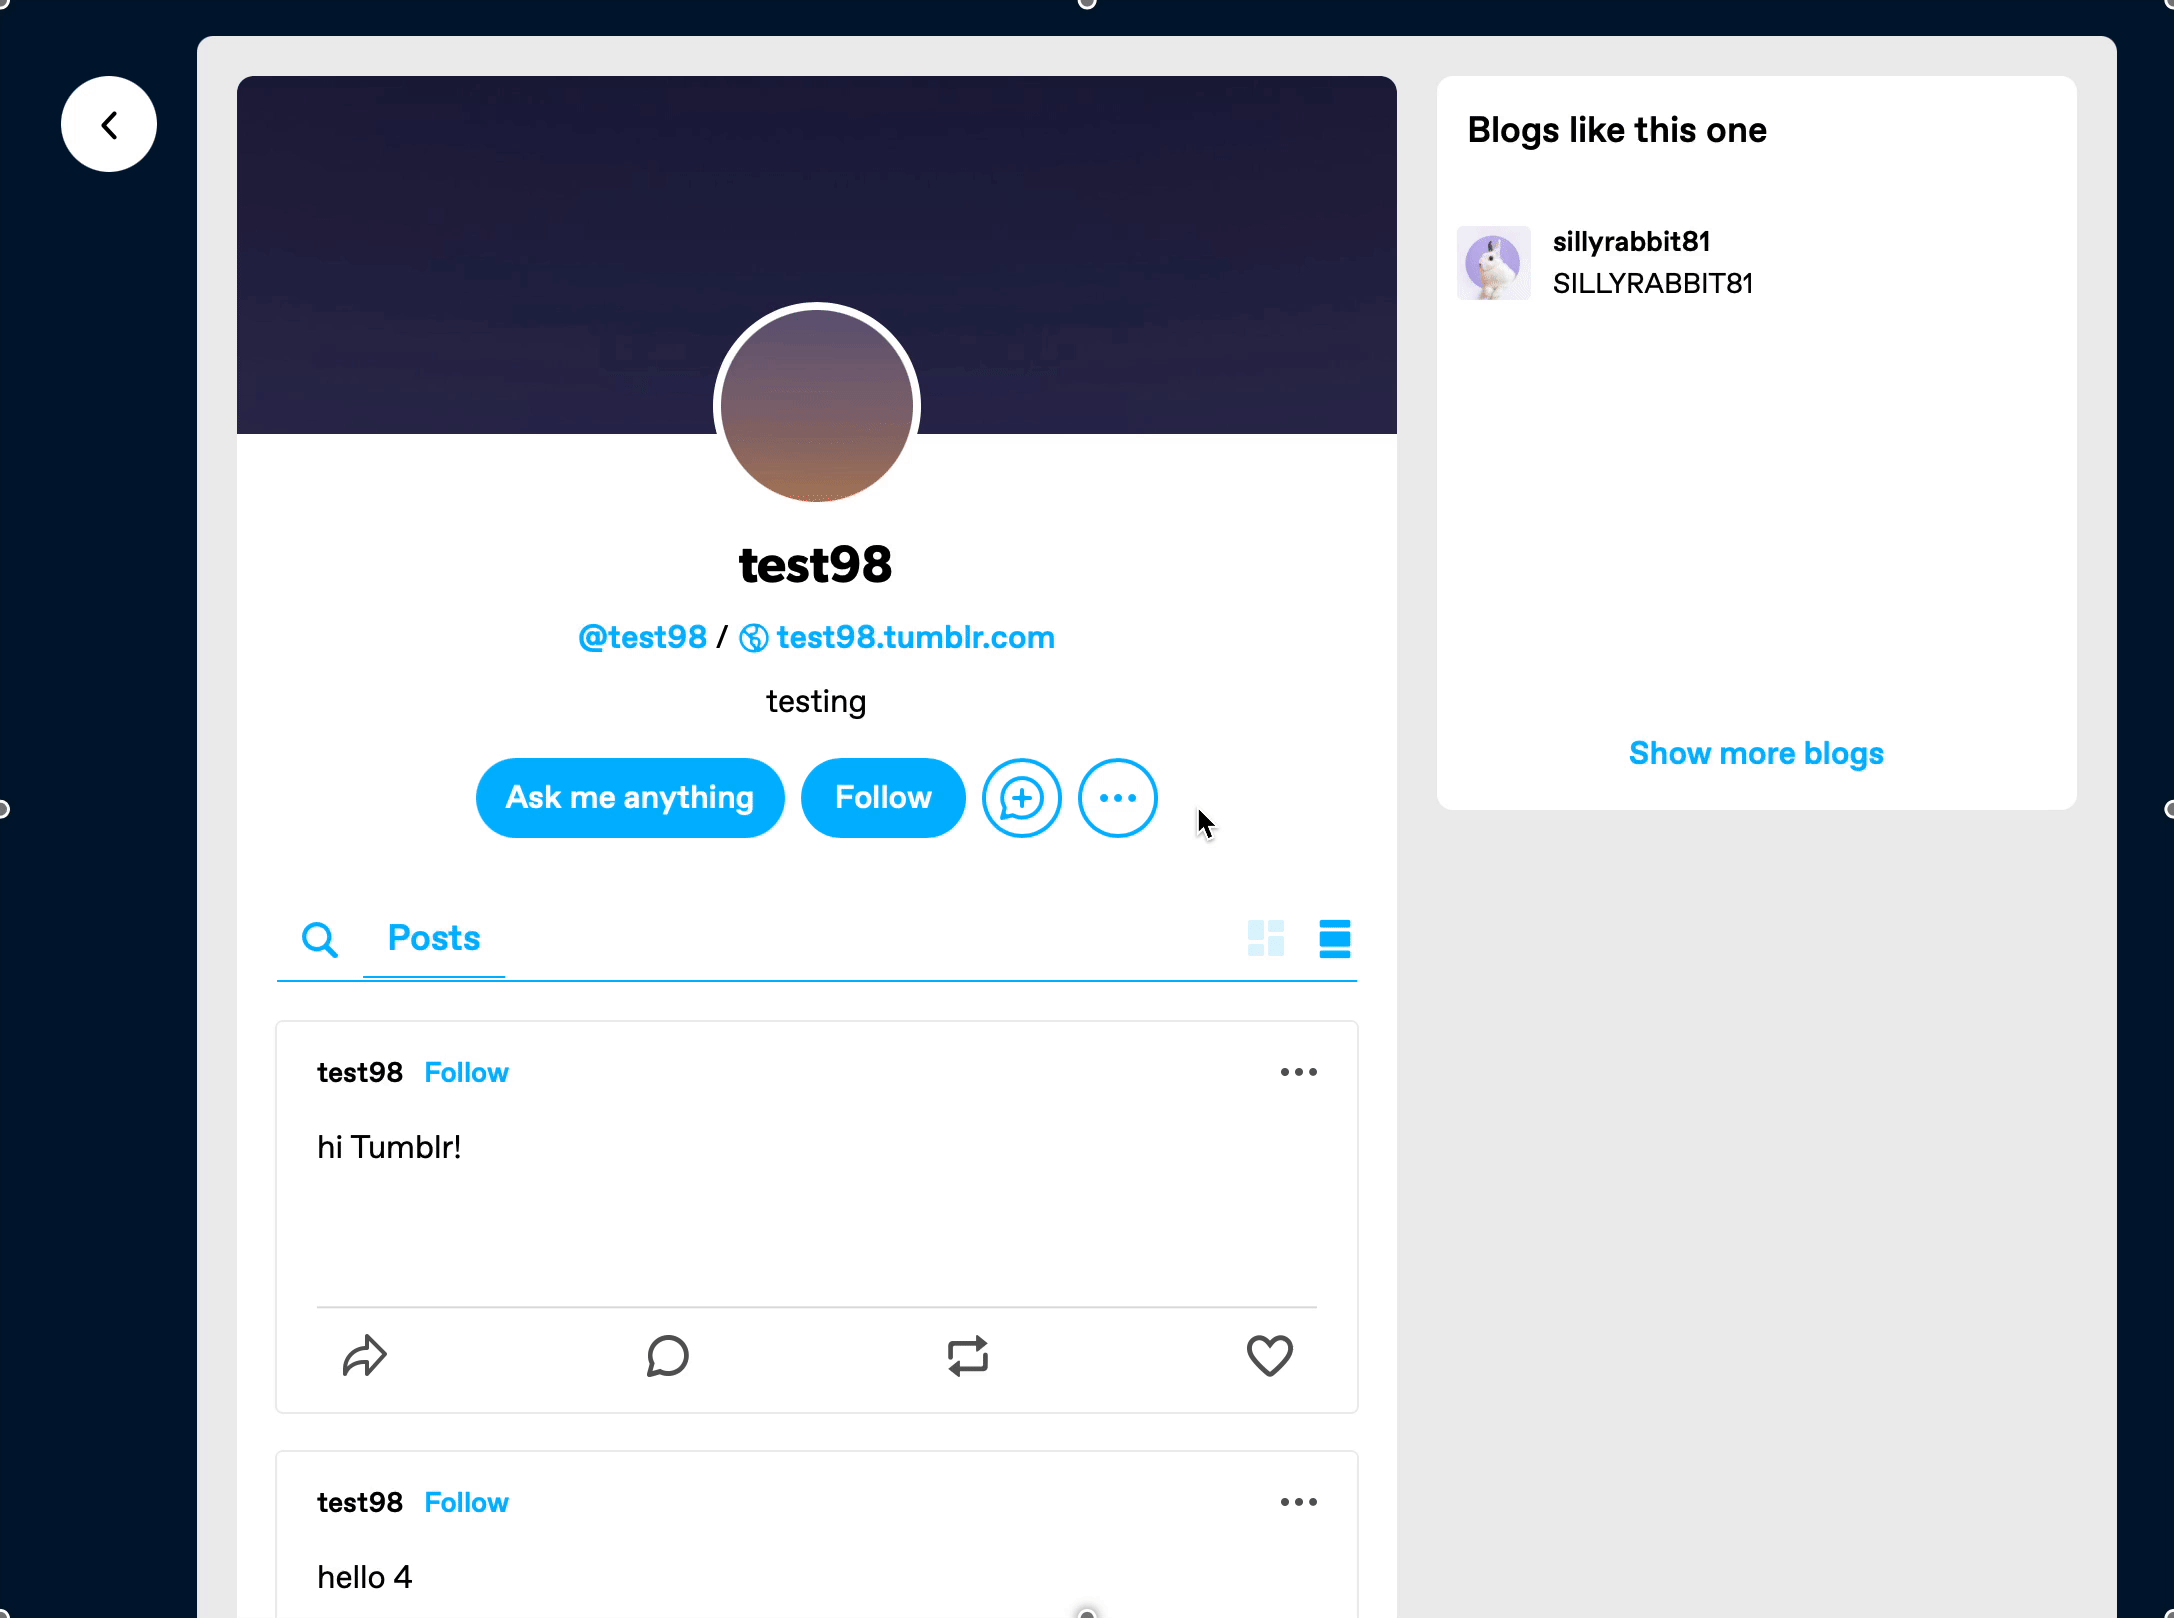 A looping GIF shows the user clicking the meatballs menu button which opens a menu showing Archive, Share to Twitter, Share to Facebook, Report, Block, and Close.